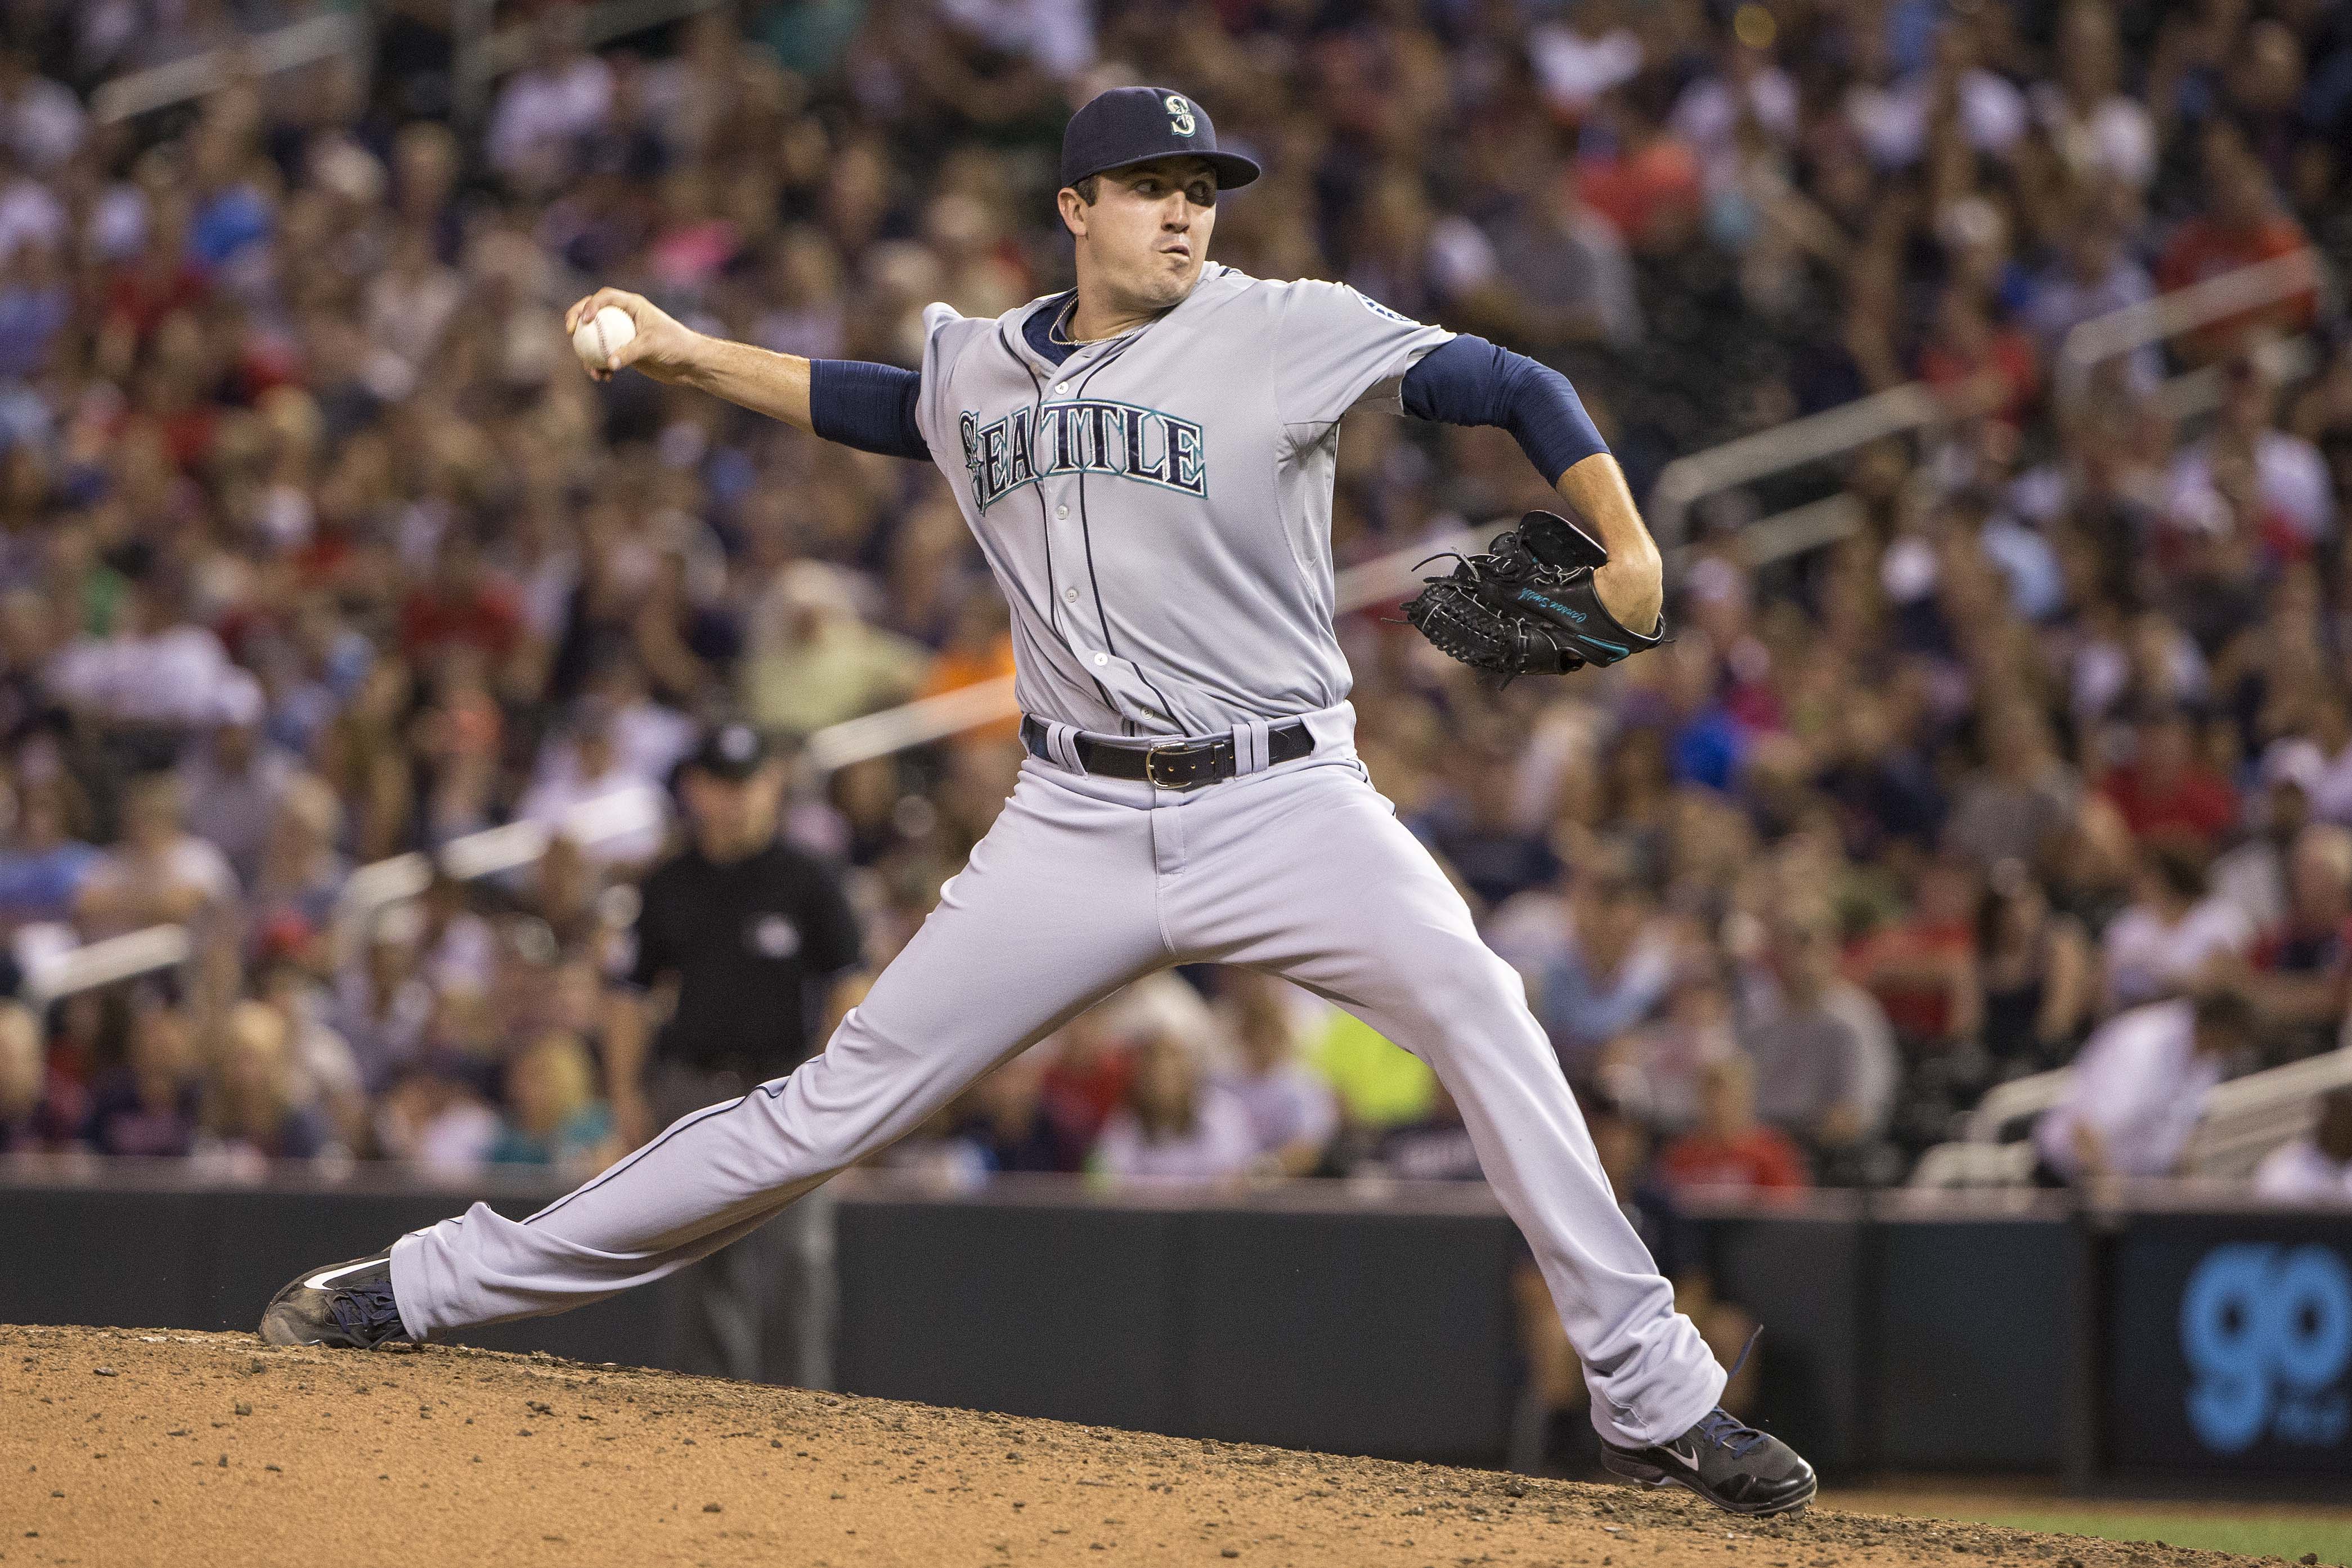 Mariners closer gives up 2 runs in 9th, Twins win, 32